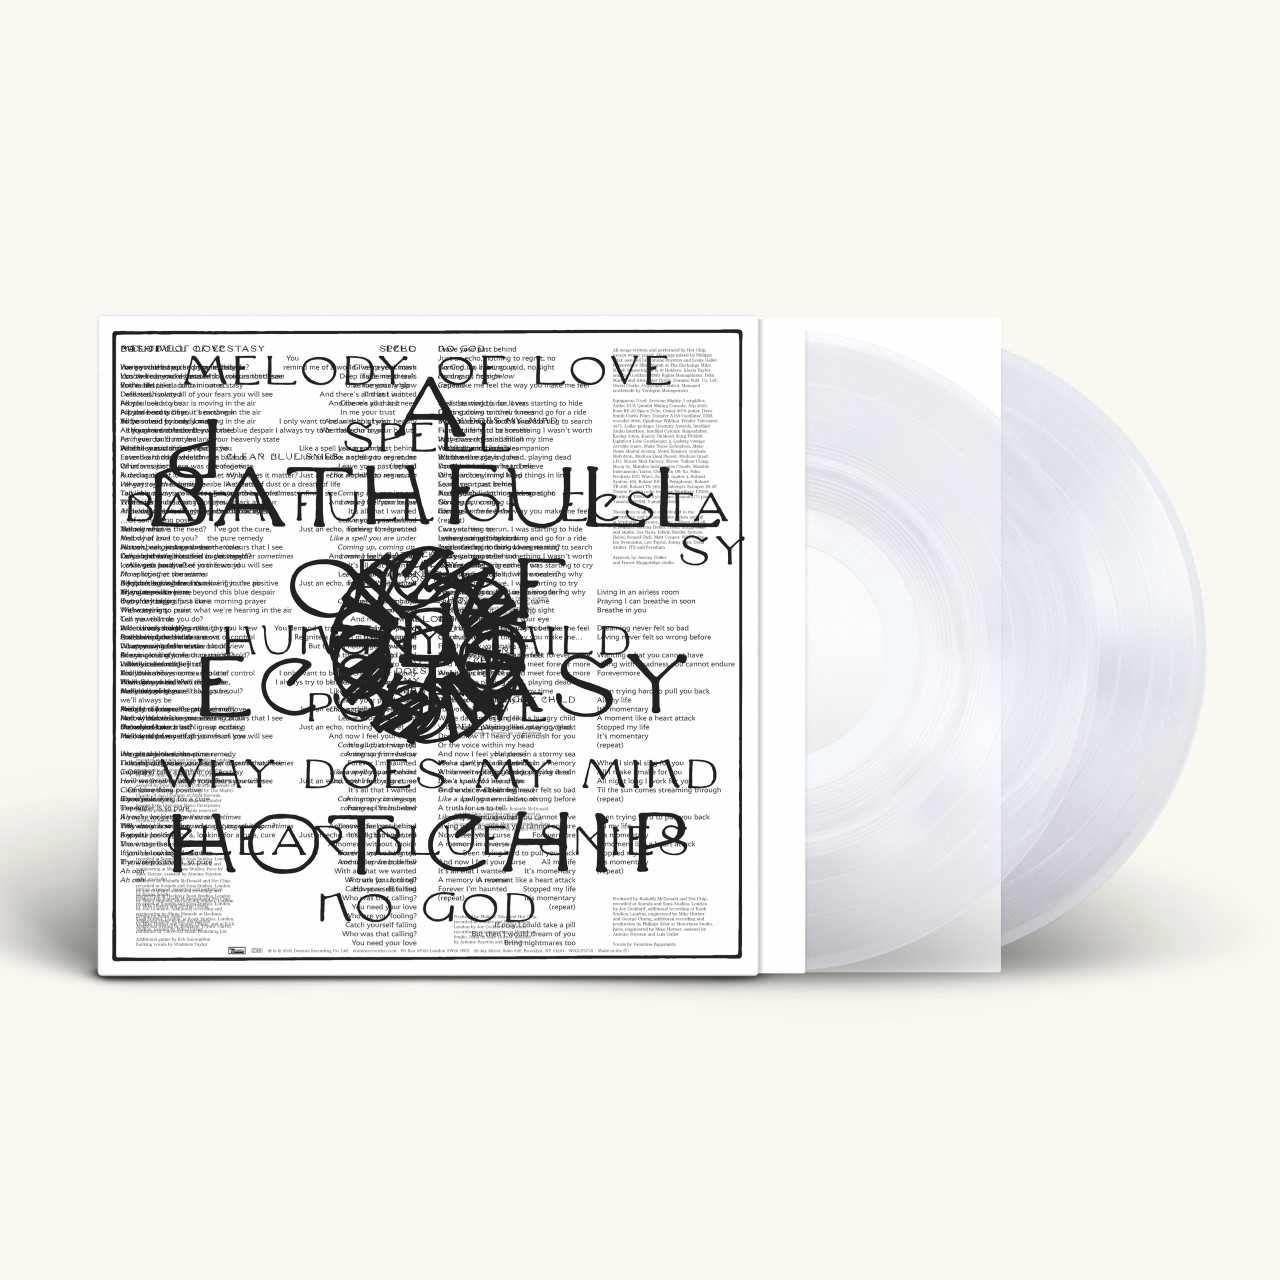 A Bath Full Of Ecstasy: Limited Edition Double Crystal Clear Vinyl 2LP